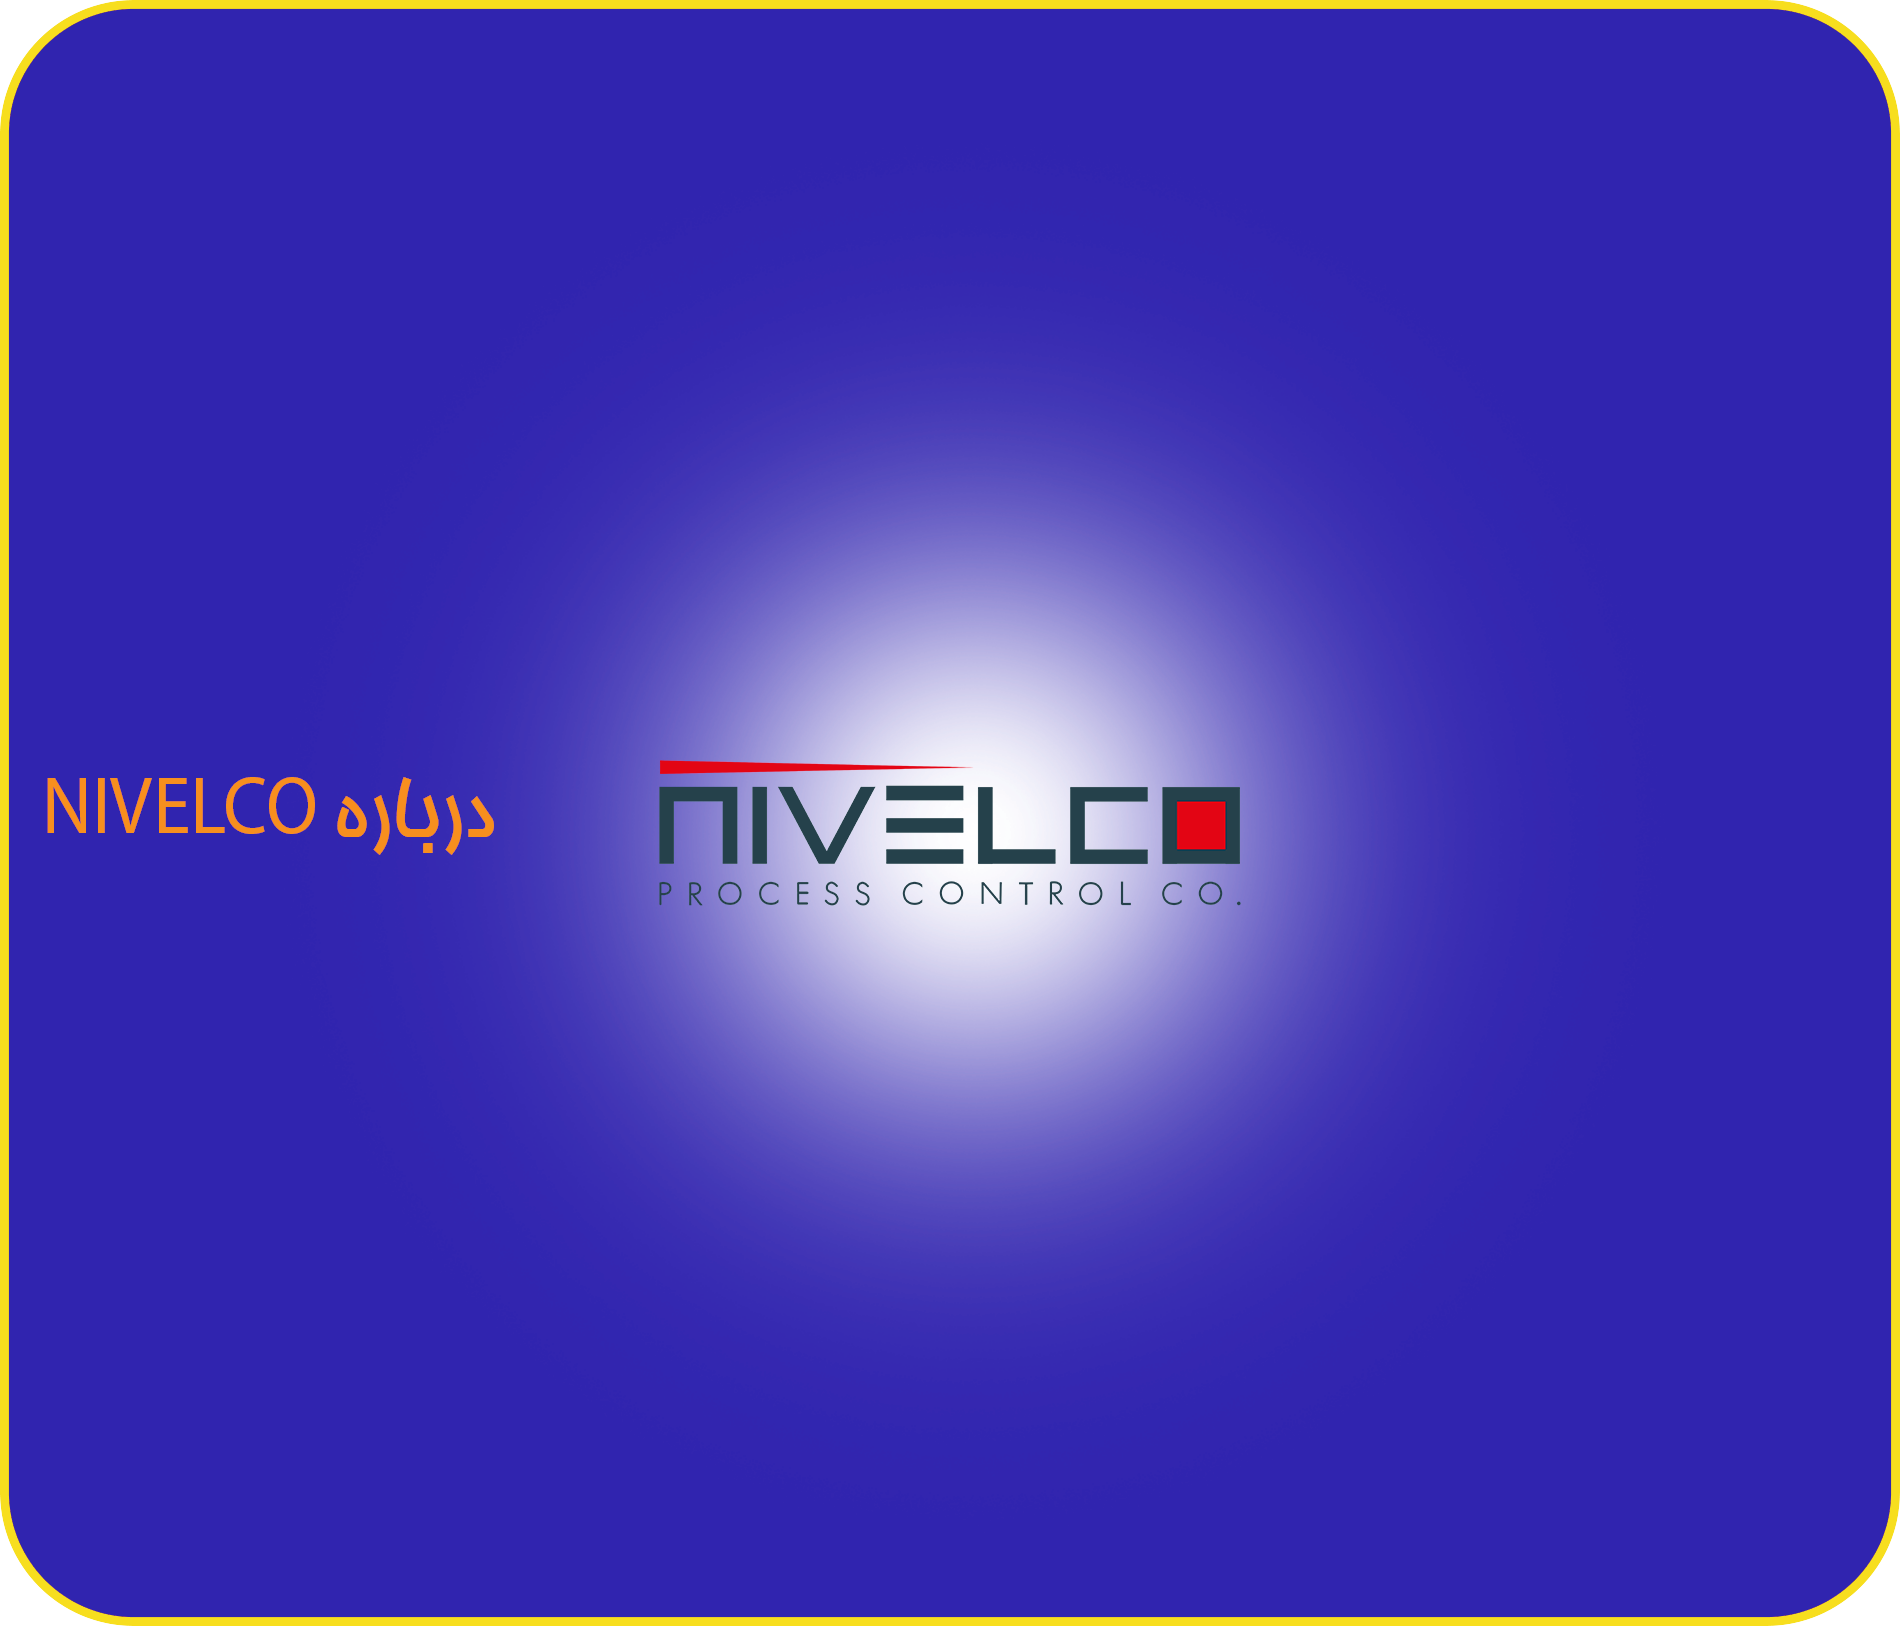 about NIVELCO